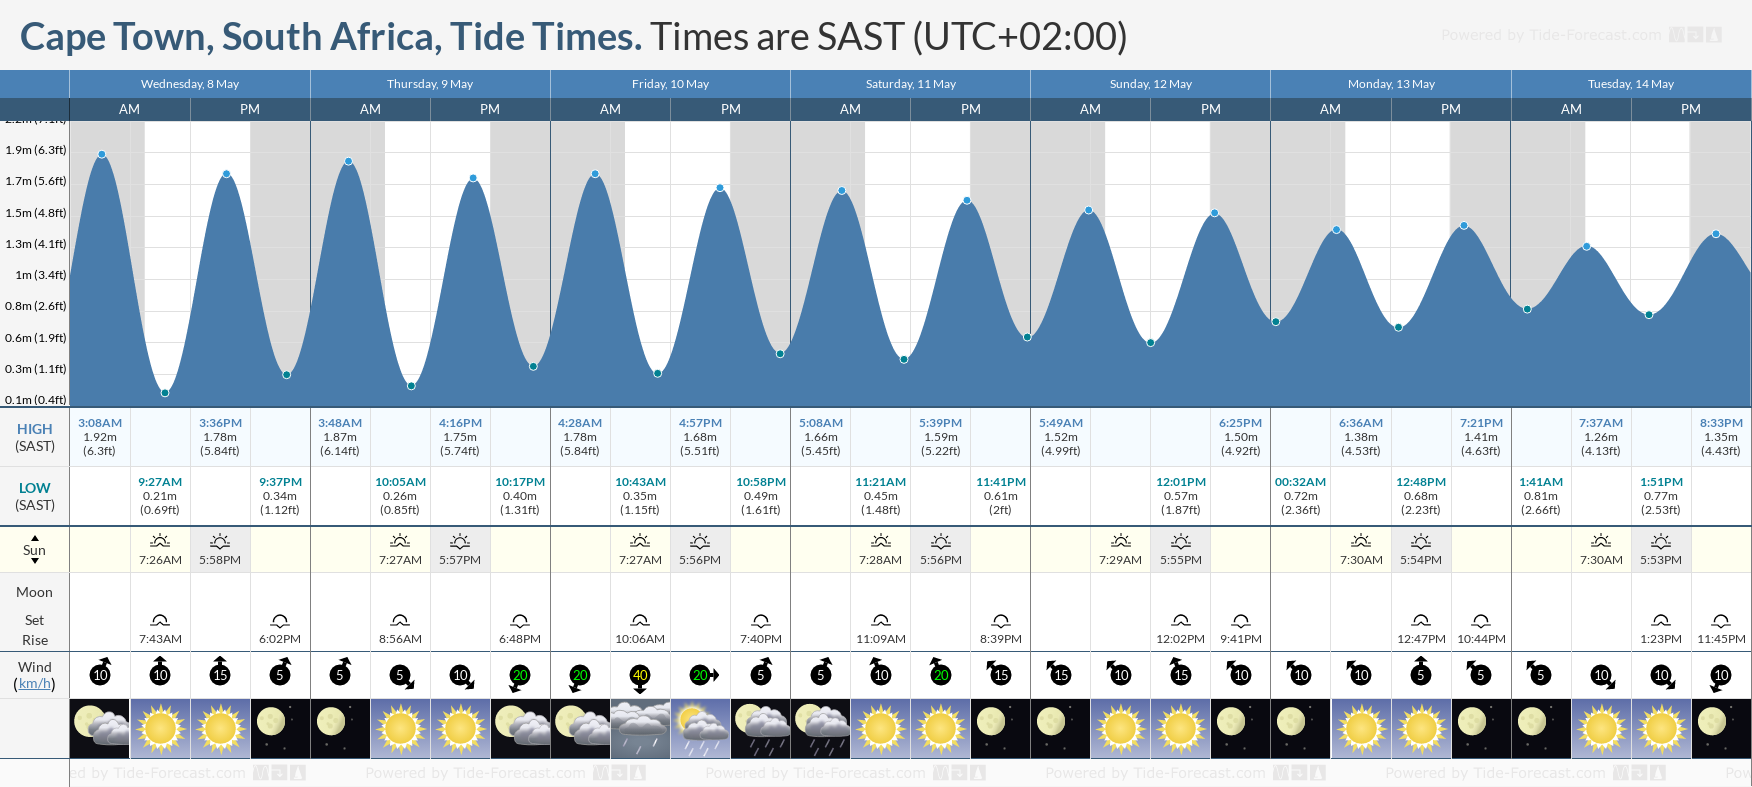 Cape Town, South Africa Tide Chart including high and low tide tide times for the next 7 days